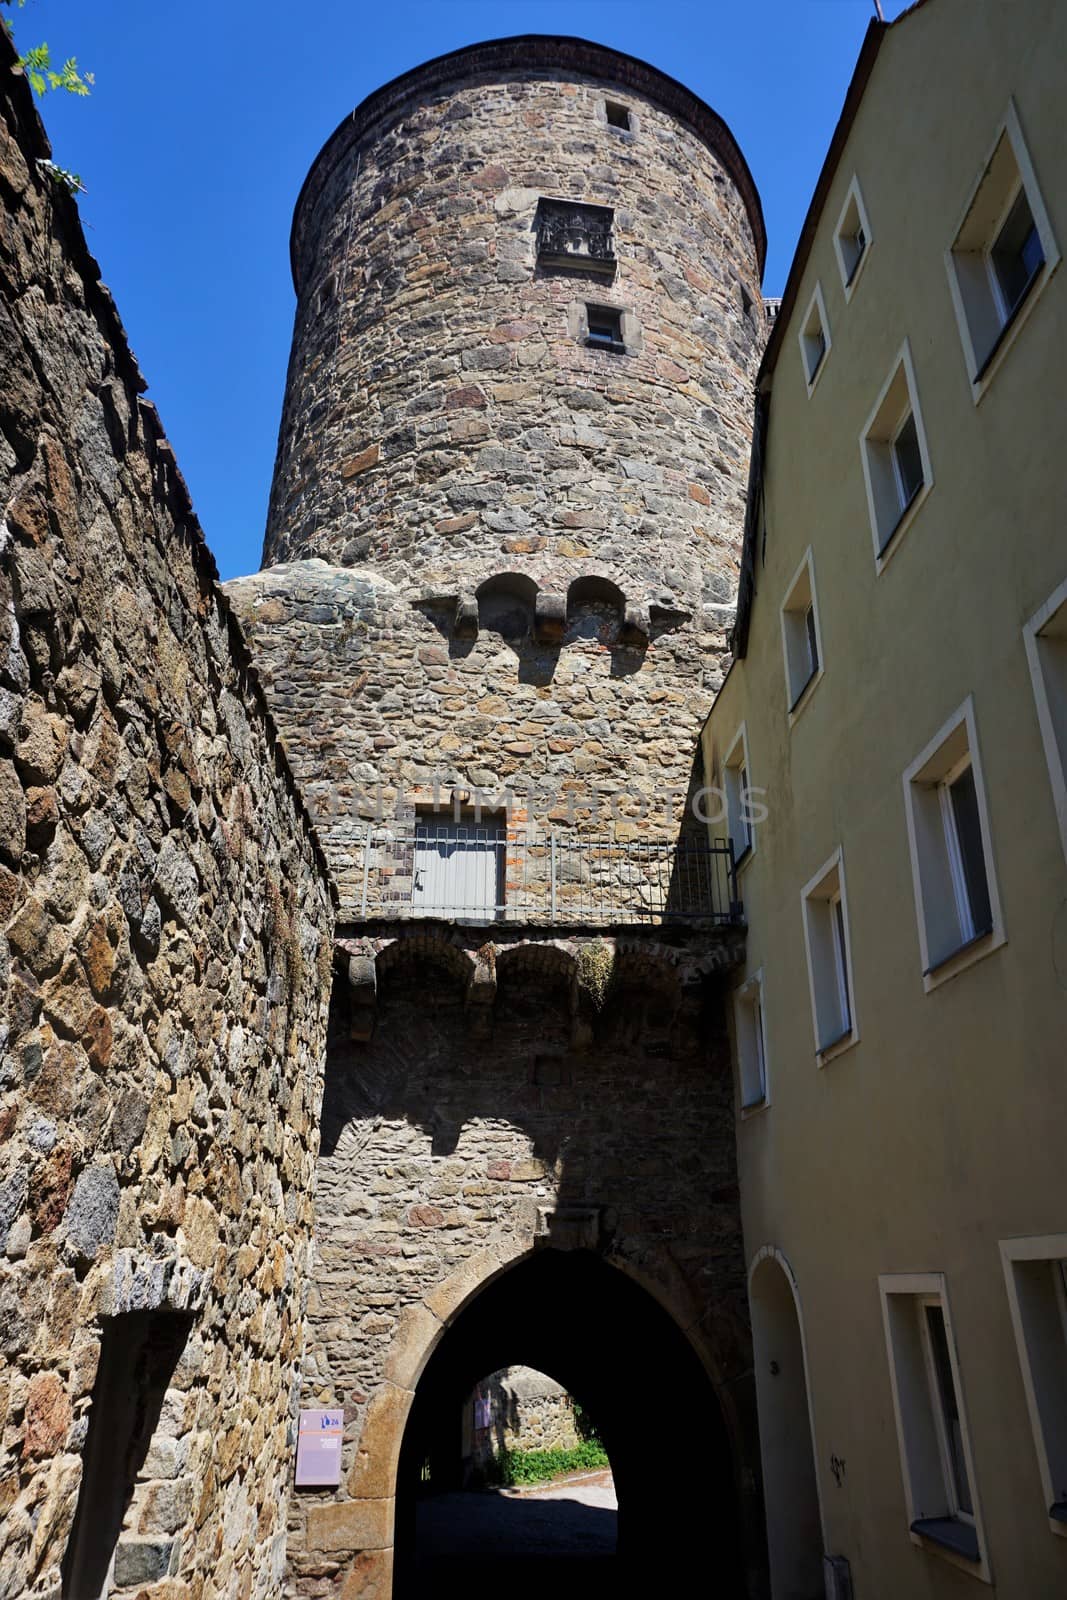 Nicolai tower from the narrow streets of Bautzen old town by pisces2386